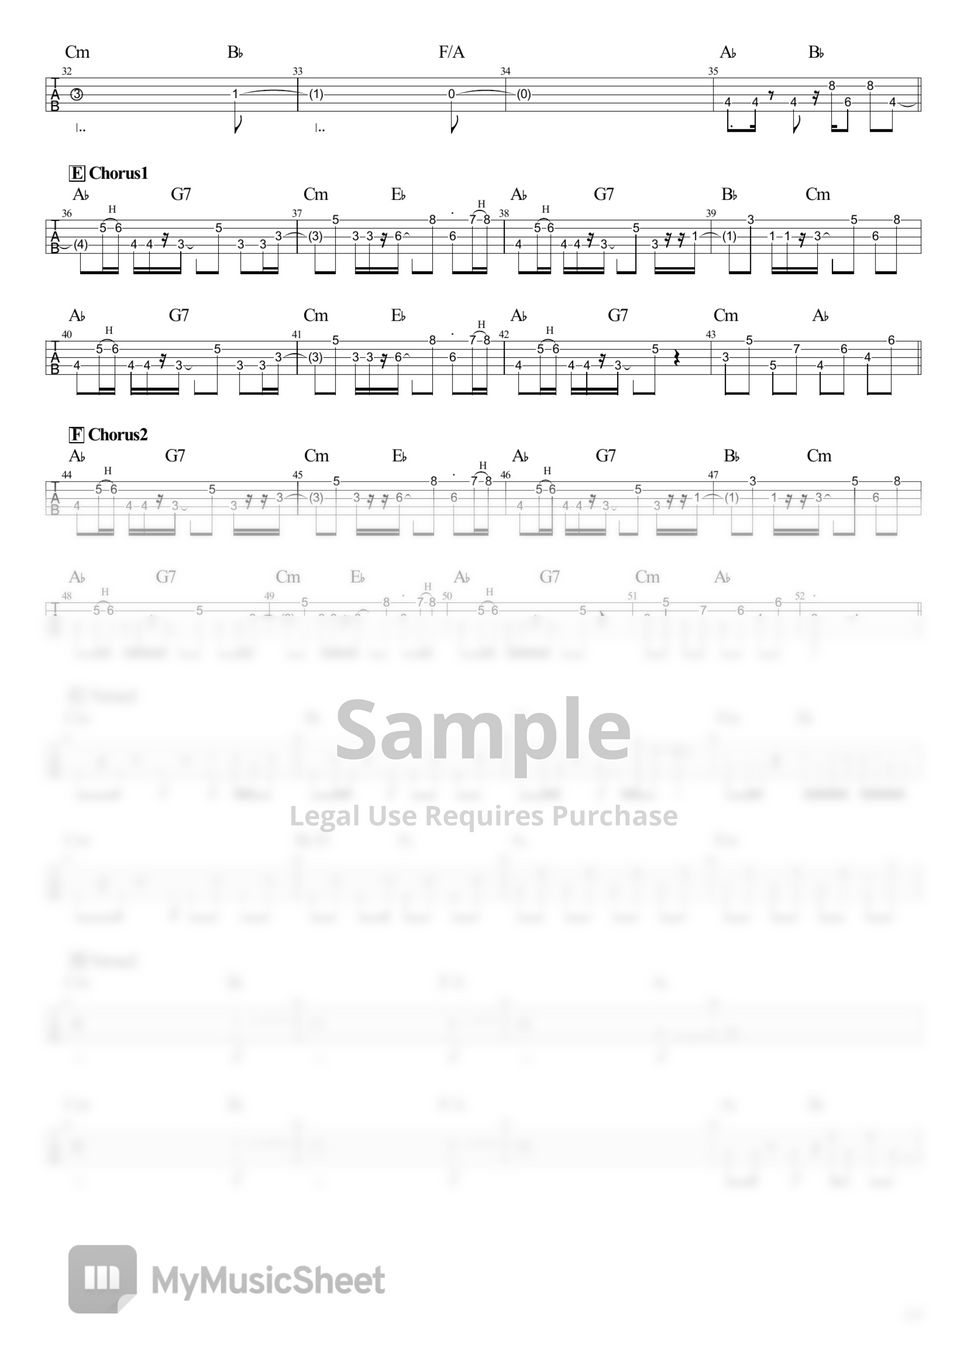 uma musume - Gaze on Me! (Full size) (Tab only/Bass Tab 5-string) by T's bass score